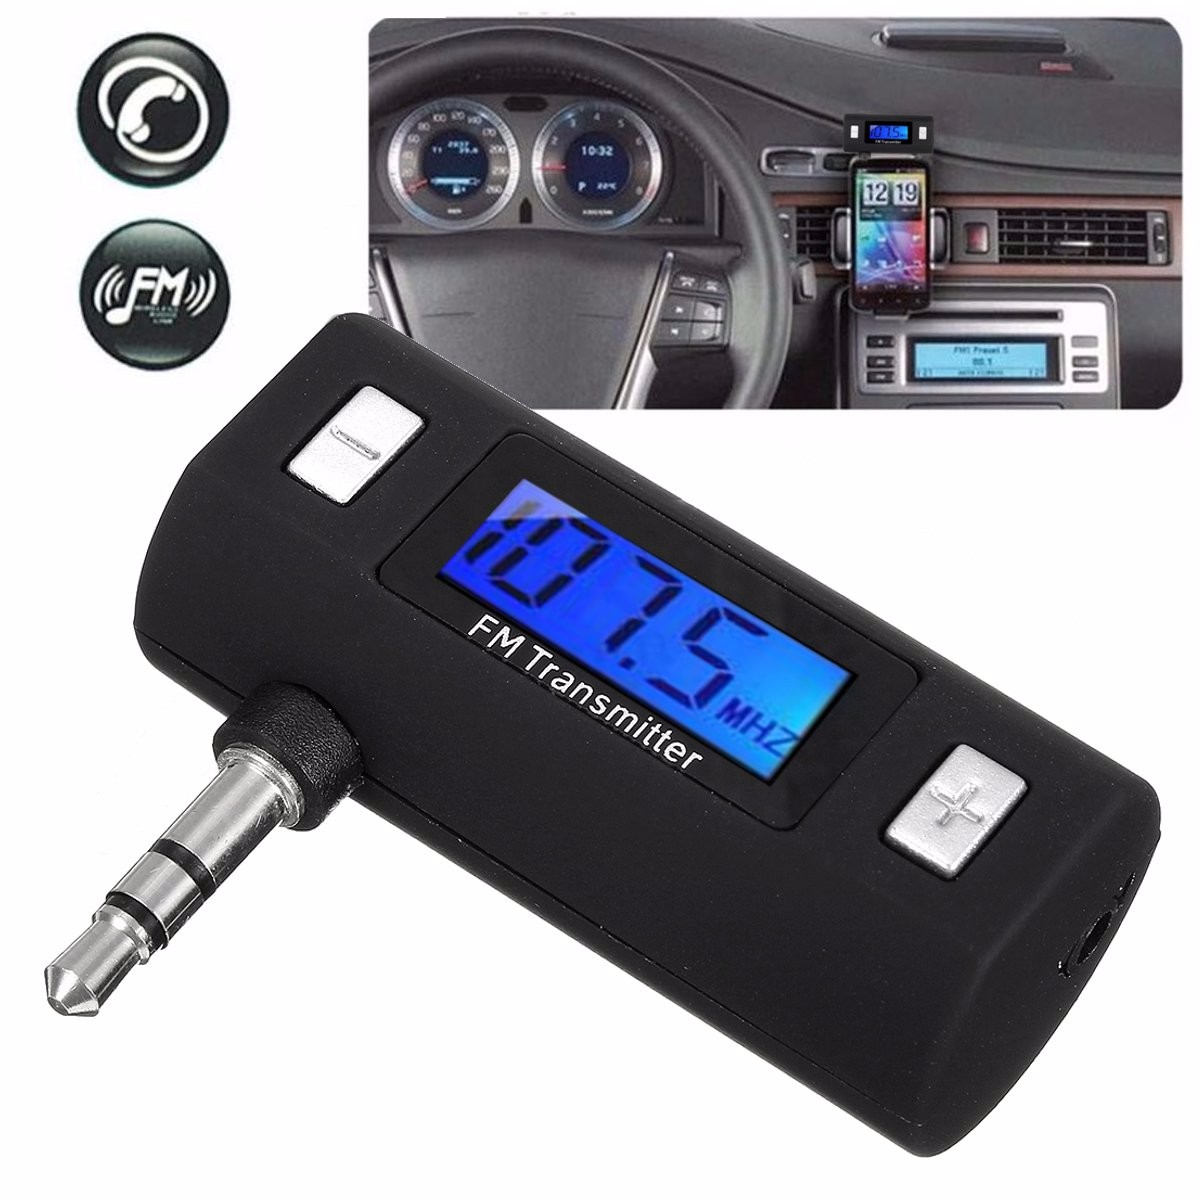 

3.5mm Wireless Handsfree Car FM Transmitter Radio MP3 Player for iPhone iPod